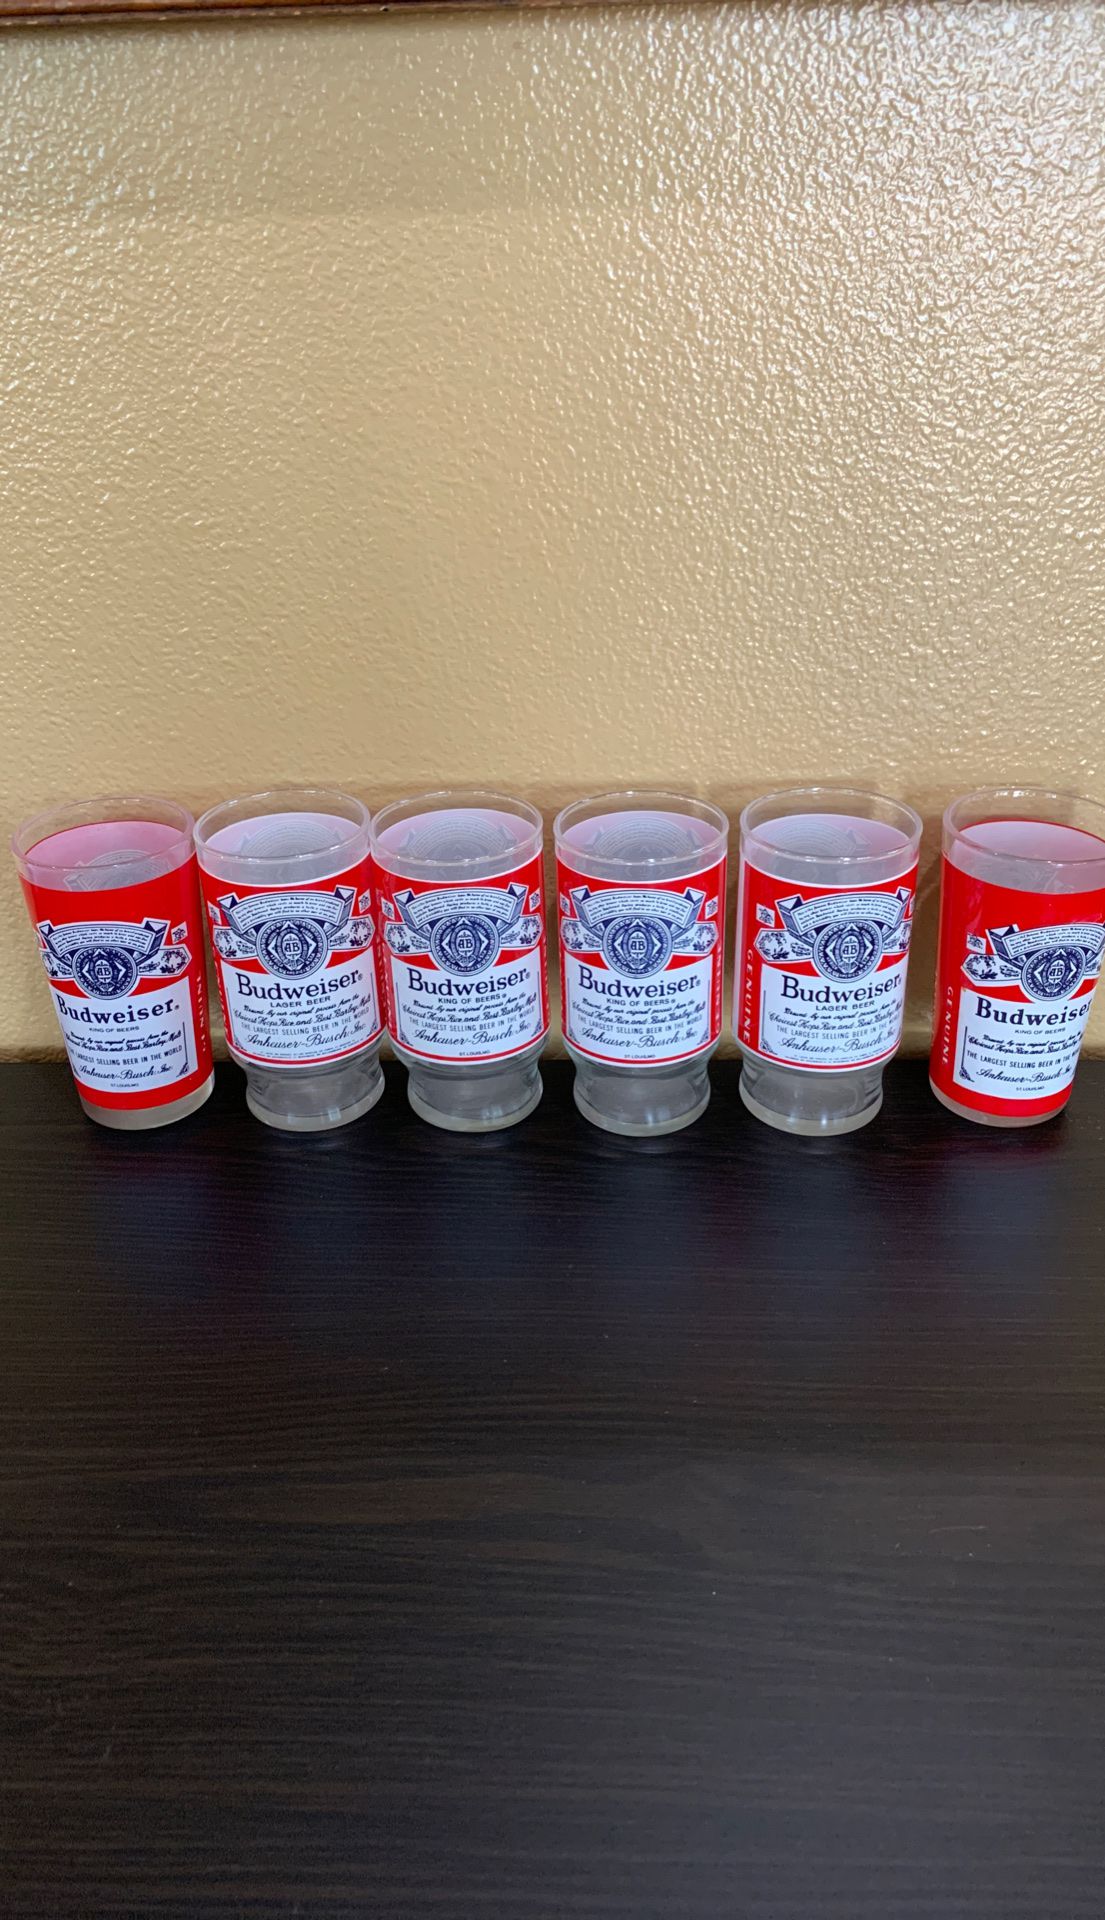 6 VINTAGE COLLECTIBLE BUDWEISER BEER GLASSES Anheuser-Busch